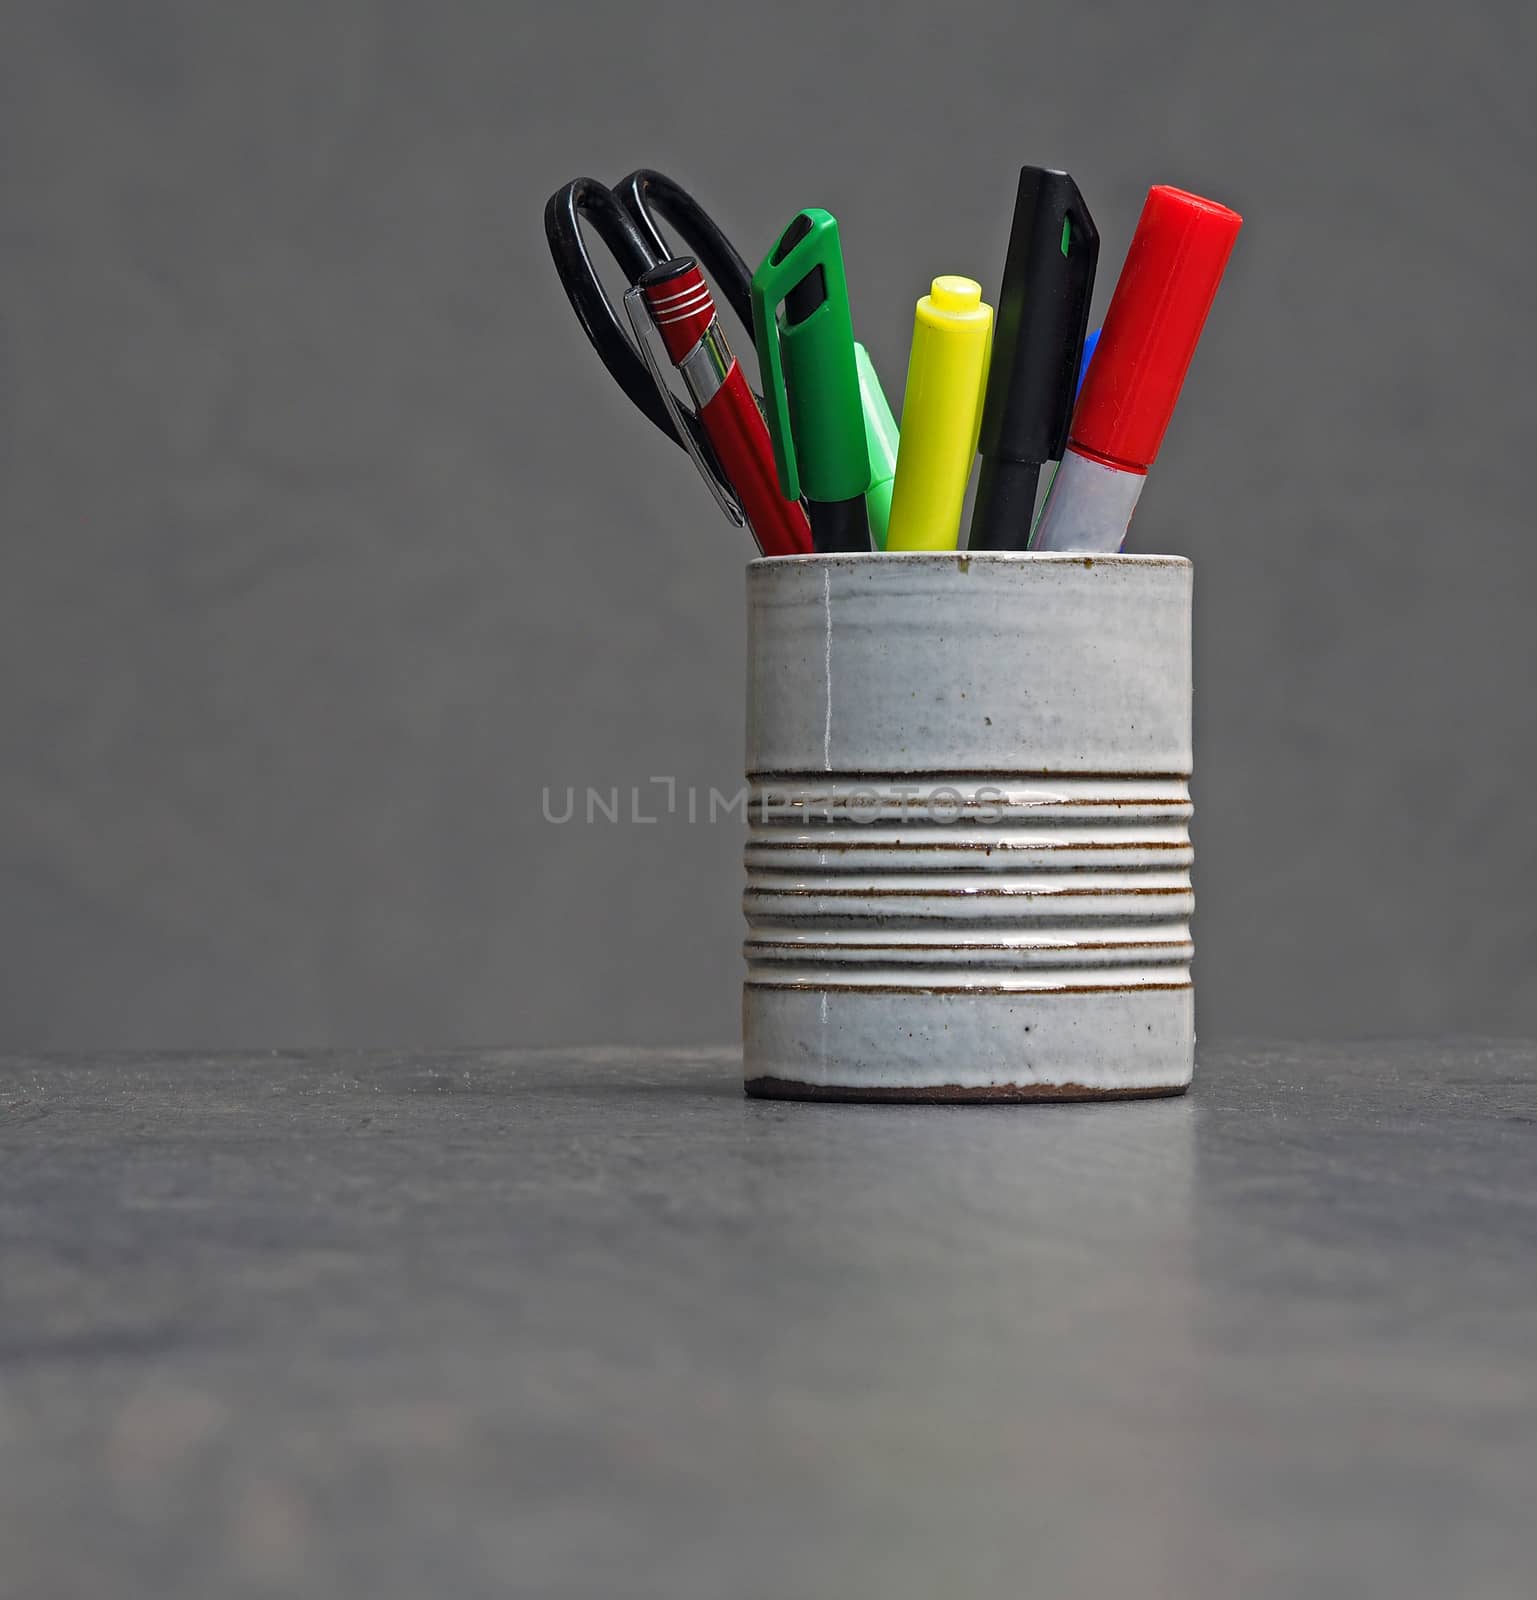 color office equipment in grey ceramic cup - markers, pen and scissors on grey background